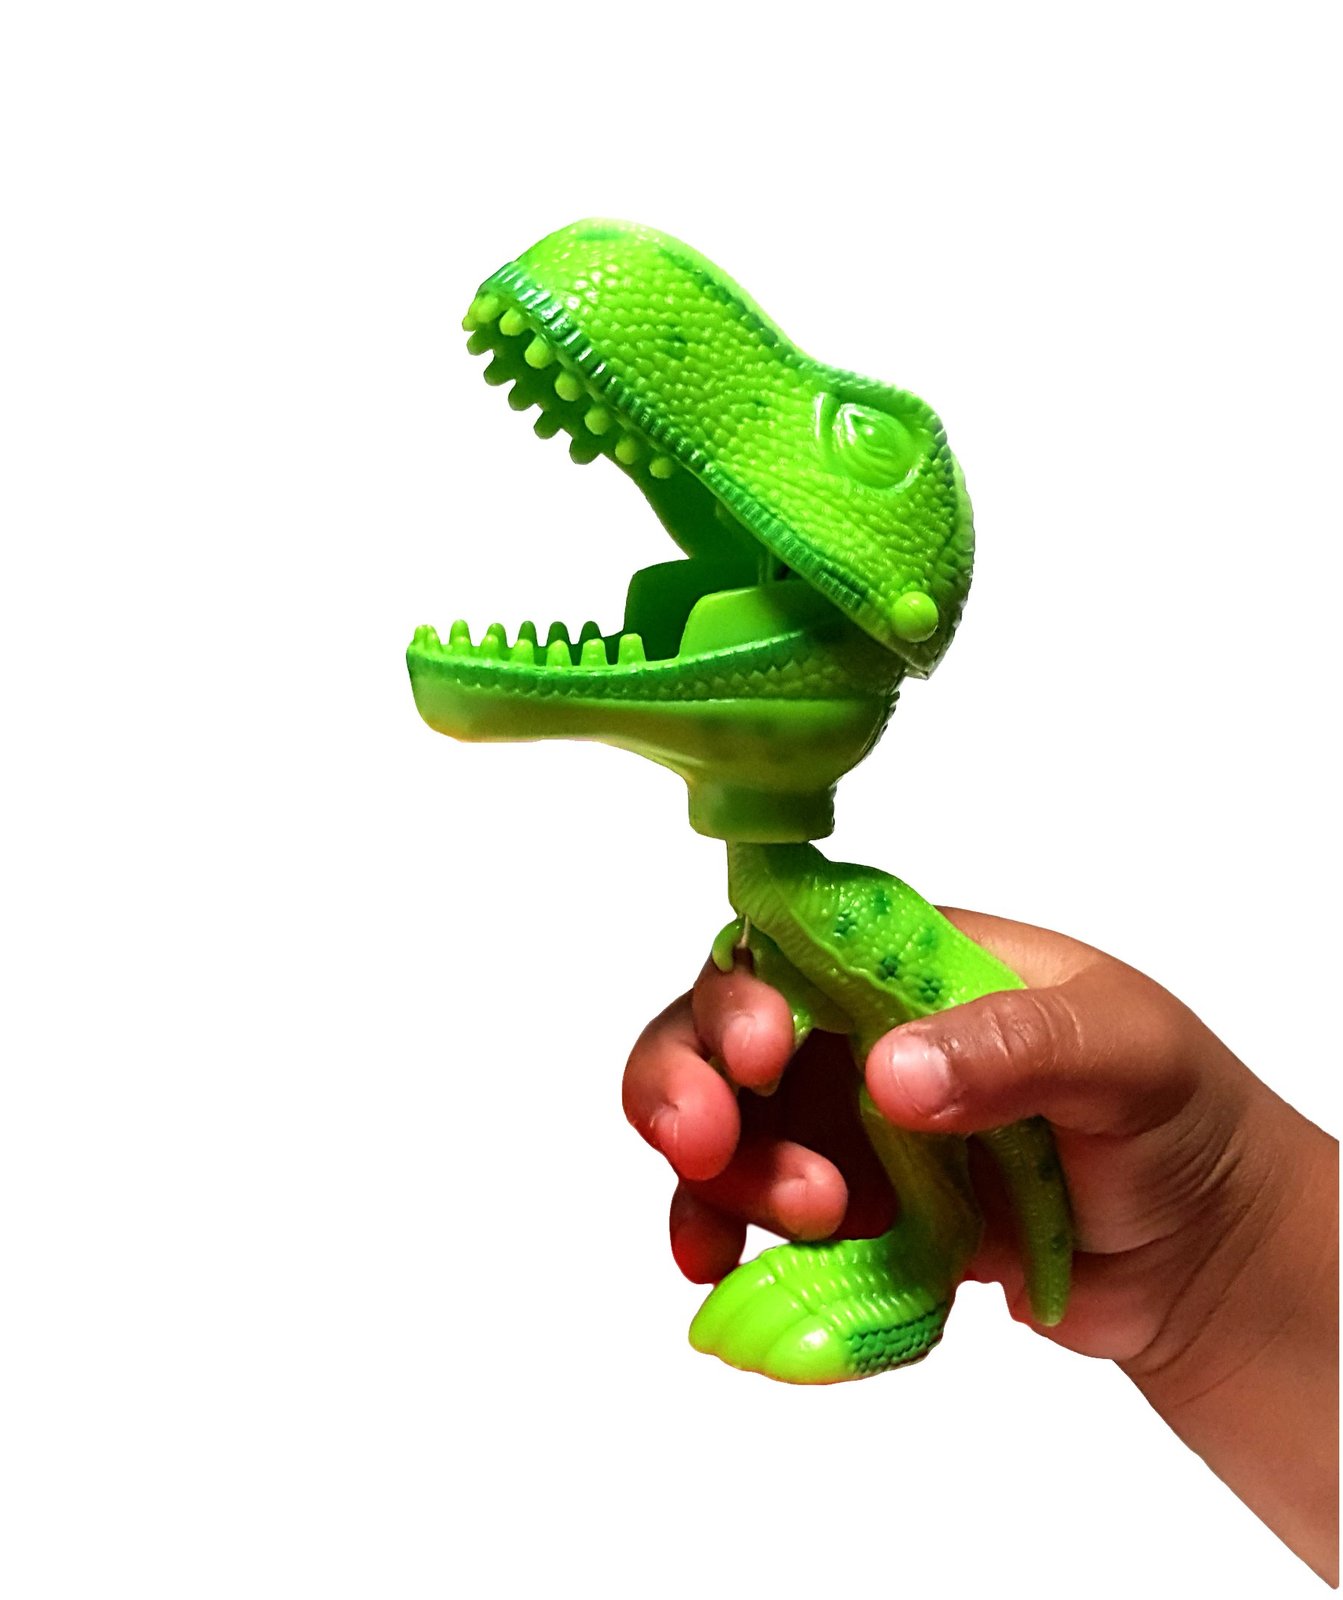 Pack of 12 Long Reach Grabbing Tool for Kids and... Assorted Dinosaur Grabbers